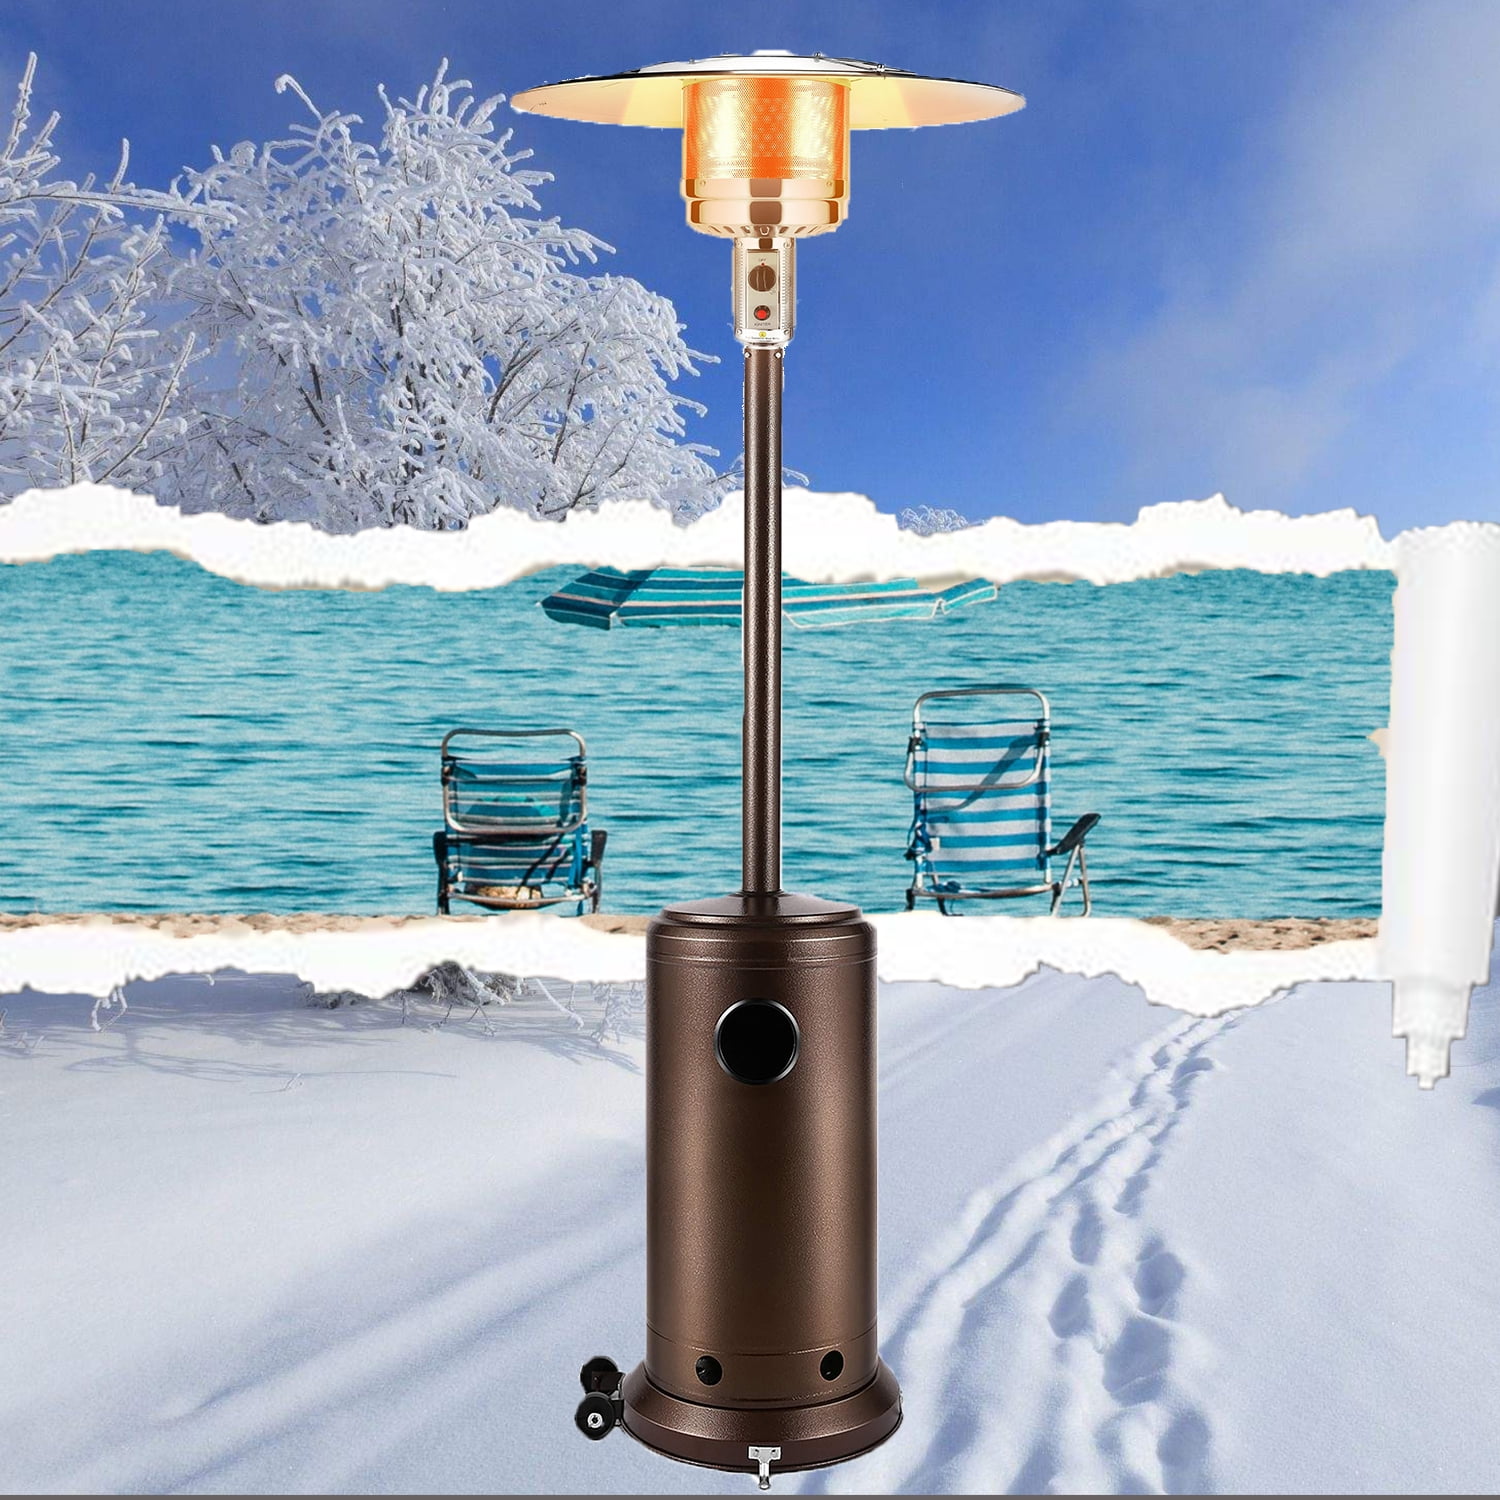 Rapid Heating Portable Heater with Wheels Commercial & Residential 20FT Diameter Heat Range Propane Heater 50000BTU Patio Outdoor Heater with Anti-tilt and Flame-out Protection System 